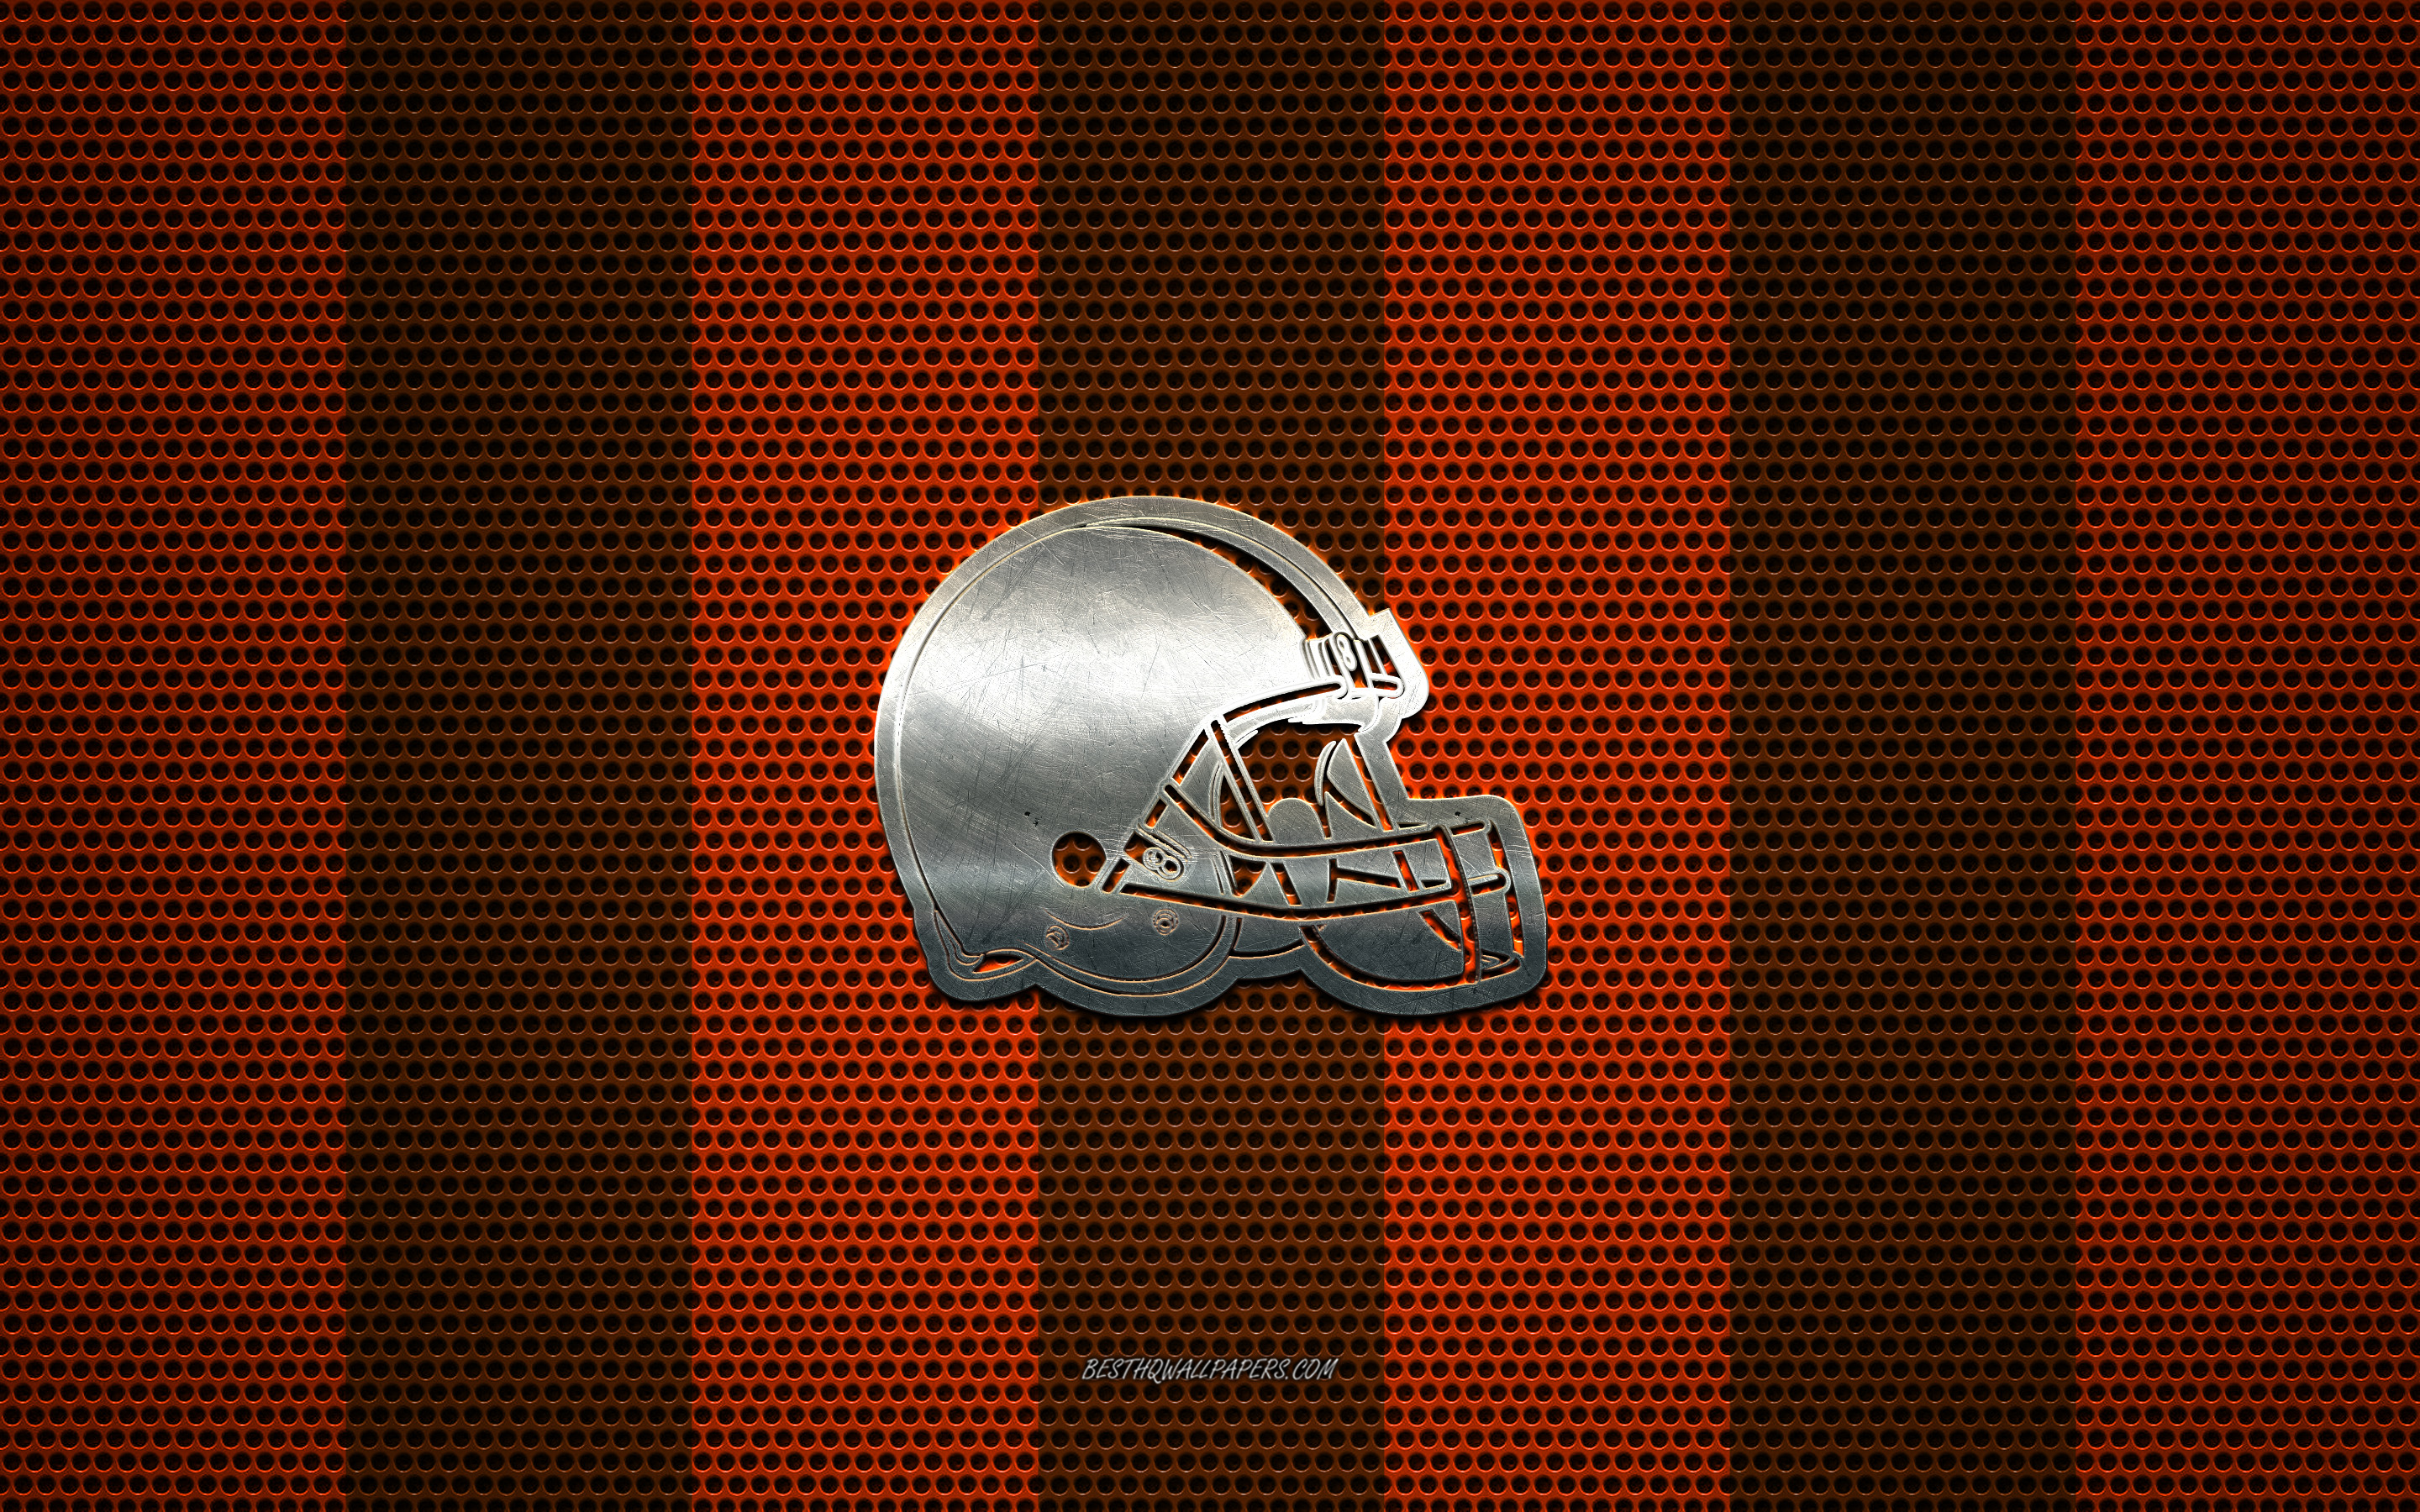 Download Wallpaper Cleveland Browns Logo, American Football Club, Metal Emblem, Brown Orange Metal Mesh Background, Cleveland Browns, NFL, Cleveland, Ohio, USA, American Football For Desktop With Resolution 2880x1800. High Quality HD Picture Wallpaper